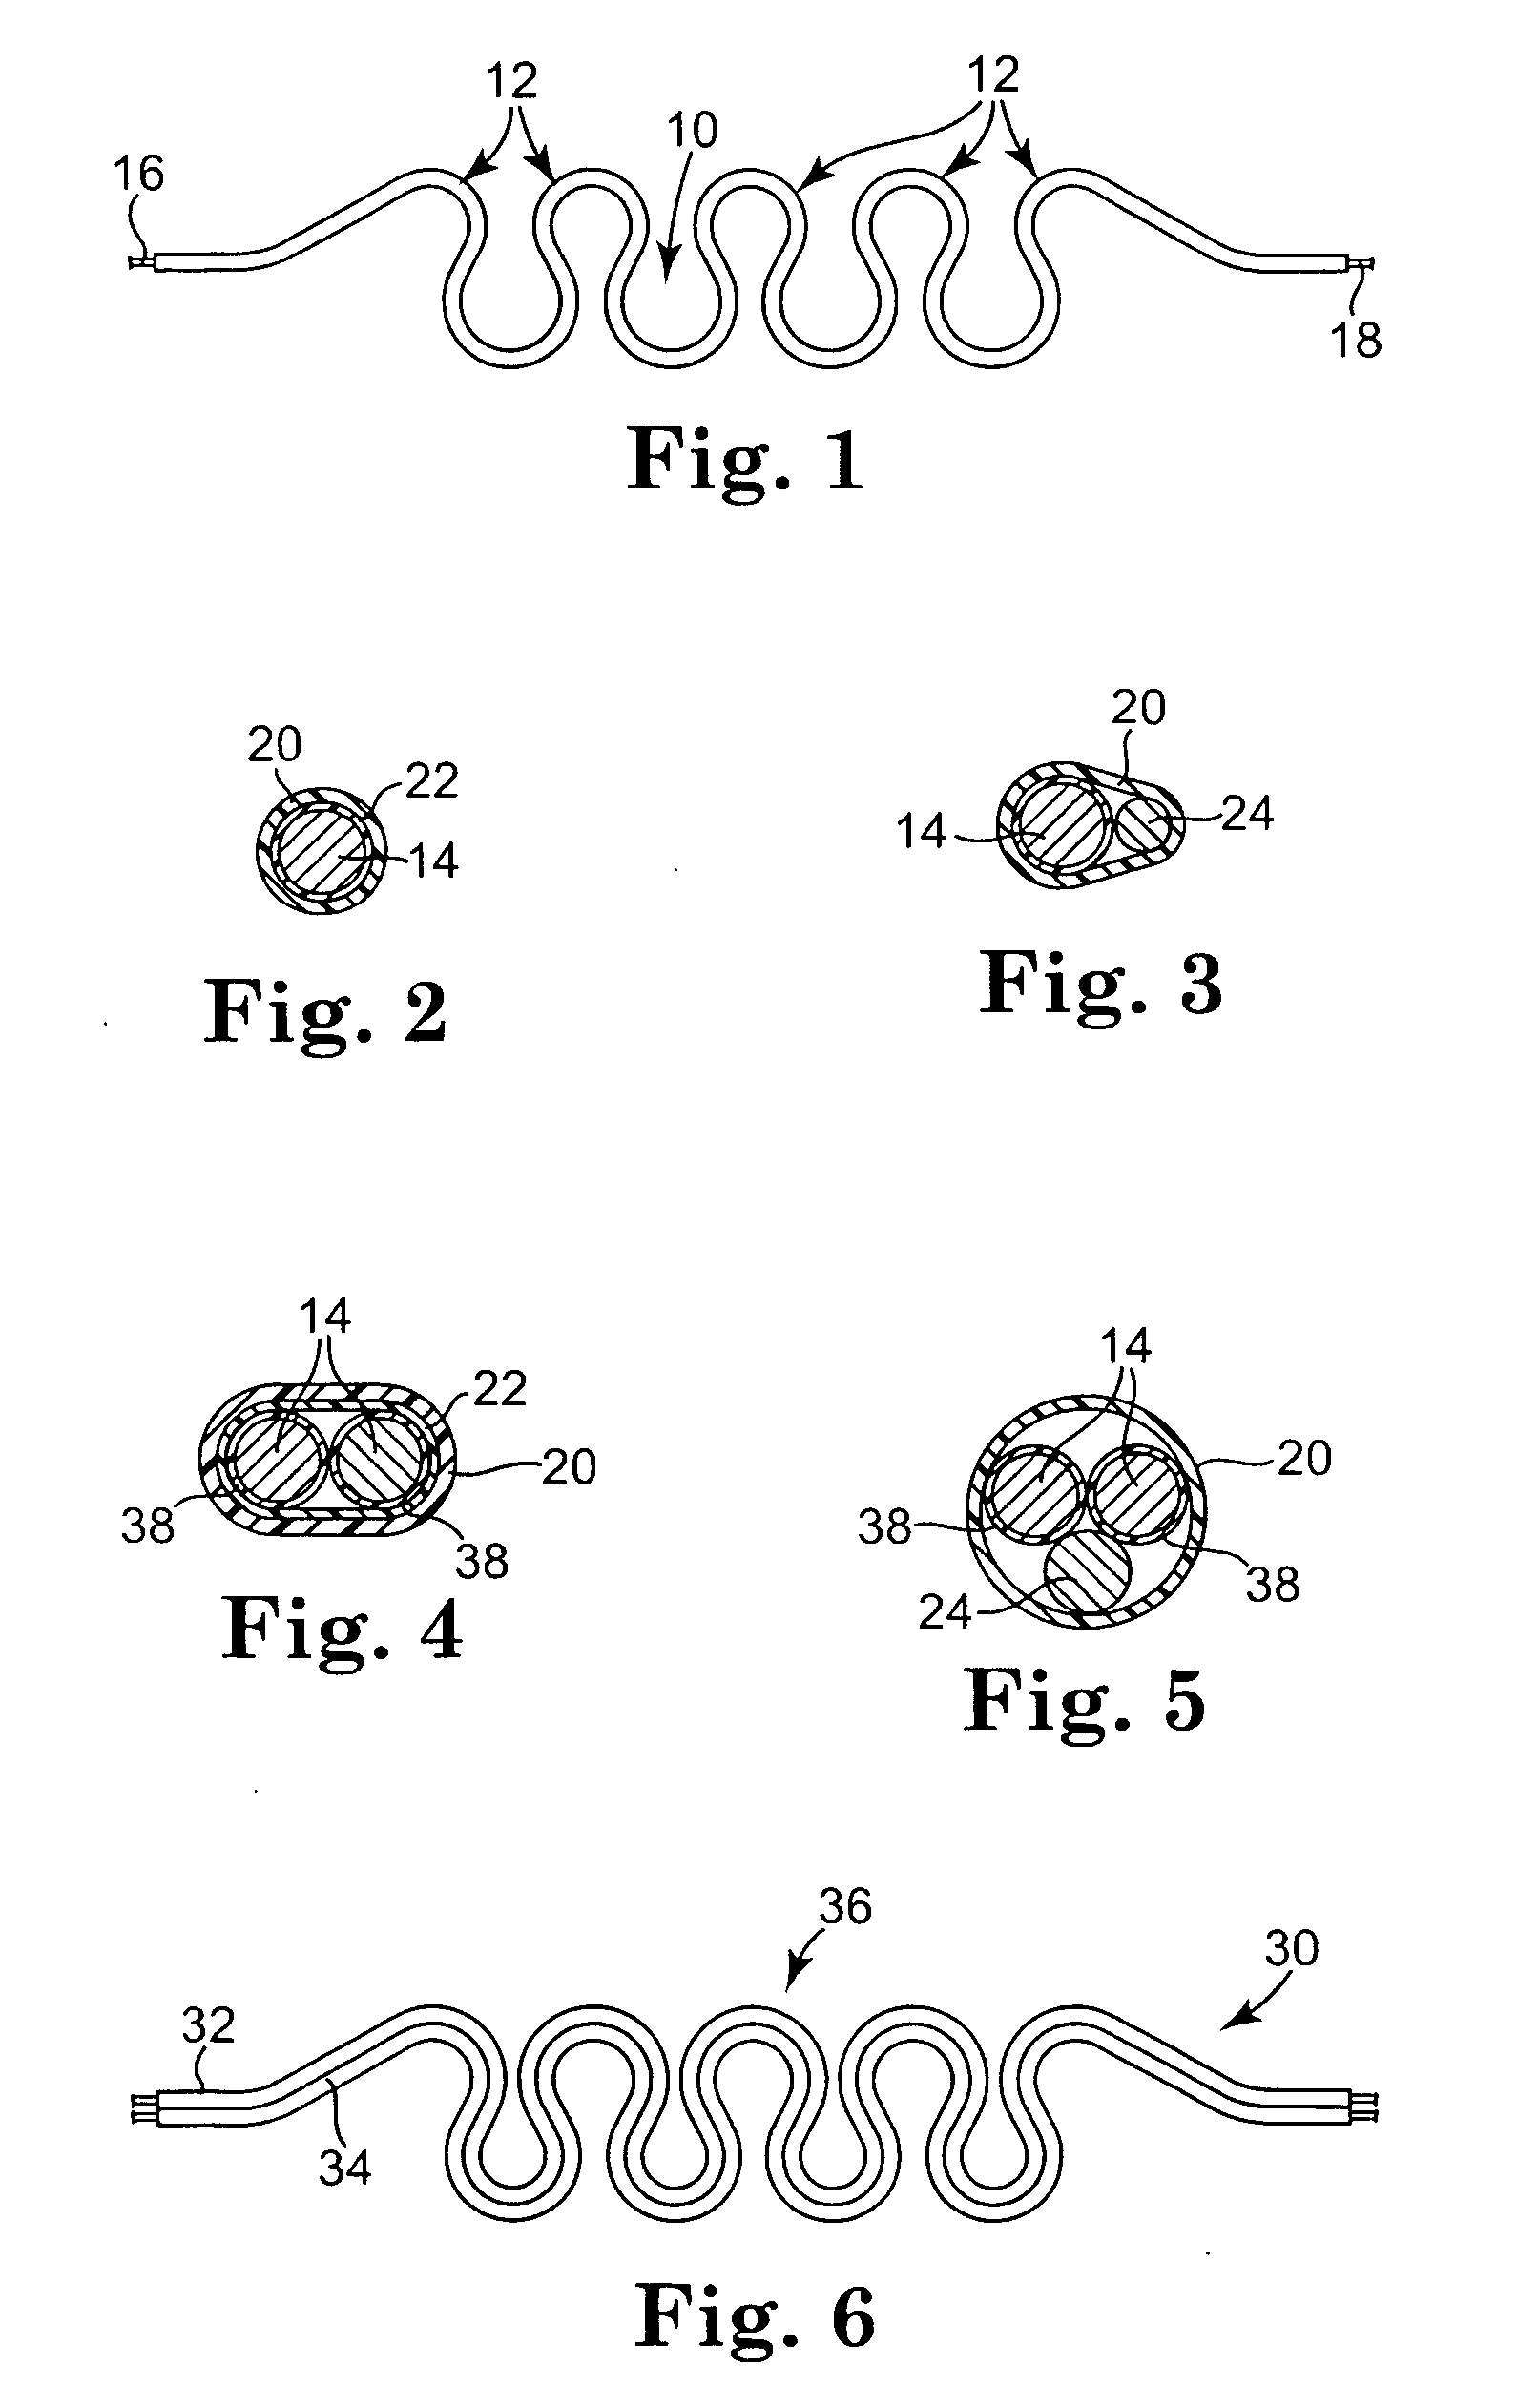 Implantable medical lead assemblies with improved flexibility and extensibility and having a substantially two-dimensional nature